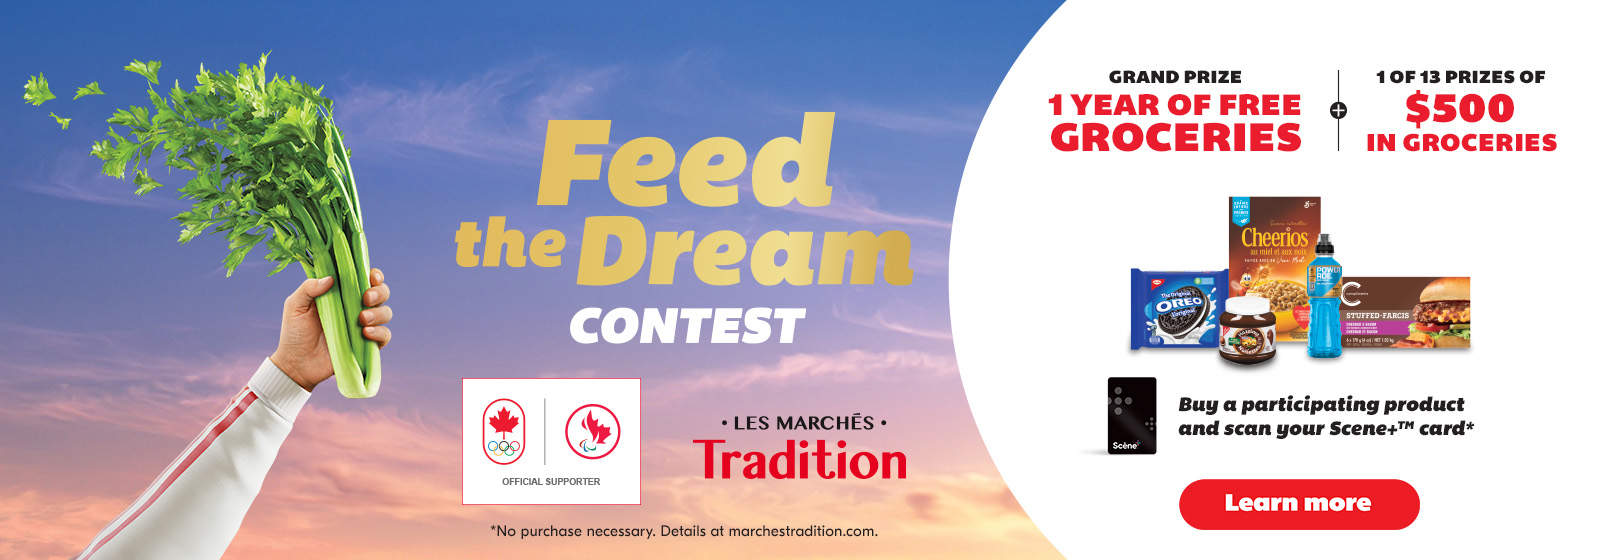 The following image contains the text," Enter the Feed the Dream contest for a chance to win the grand prize of a year's worth of free groceries or one of 13 prizes of $500 in groceries. To enter, buy a participating product, scan your Scene+ card, and click the 'Learn More' button for details.